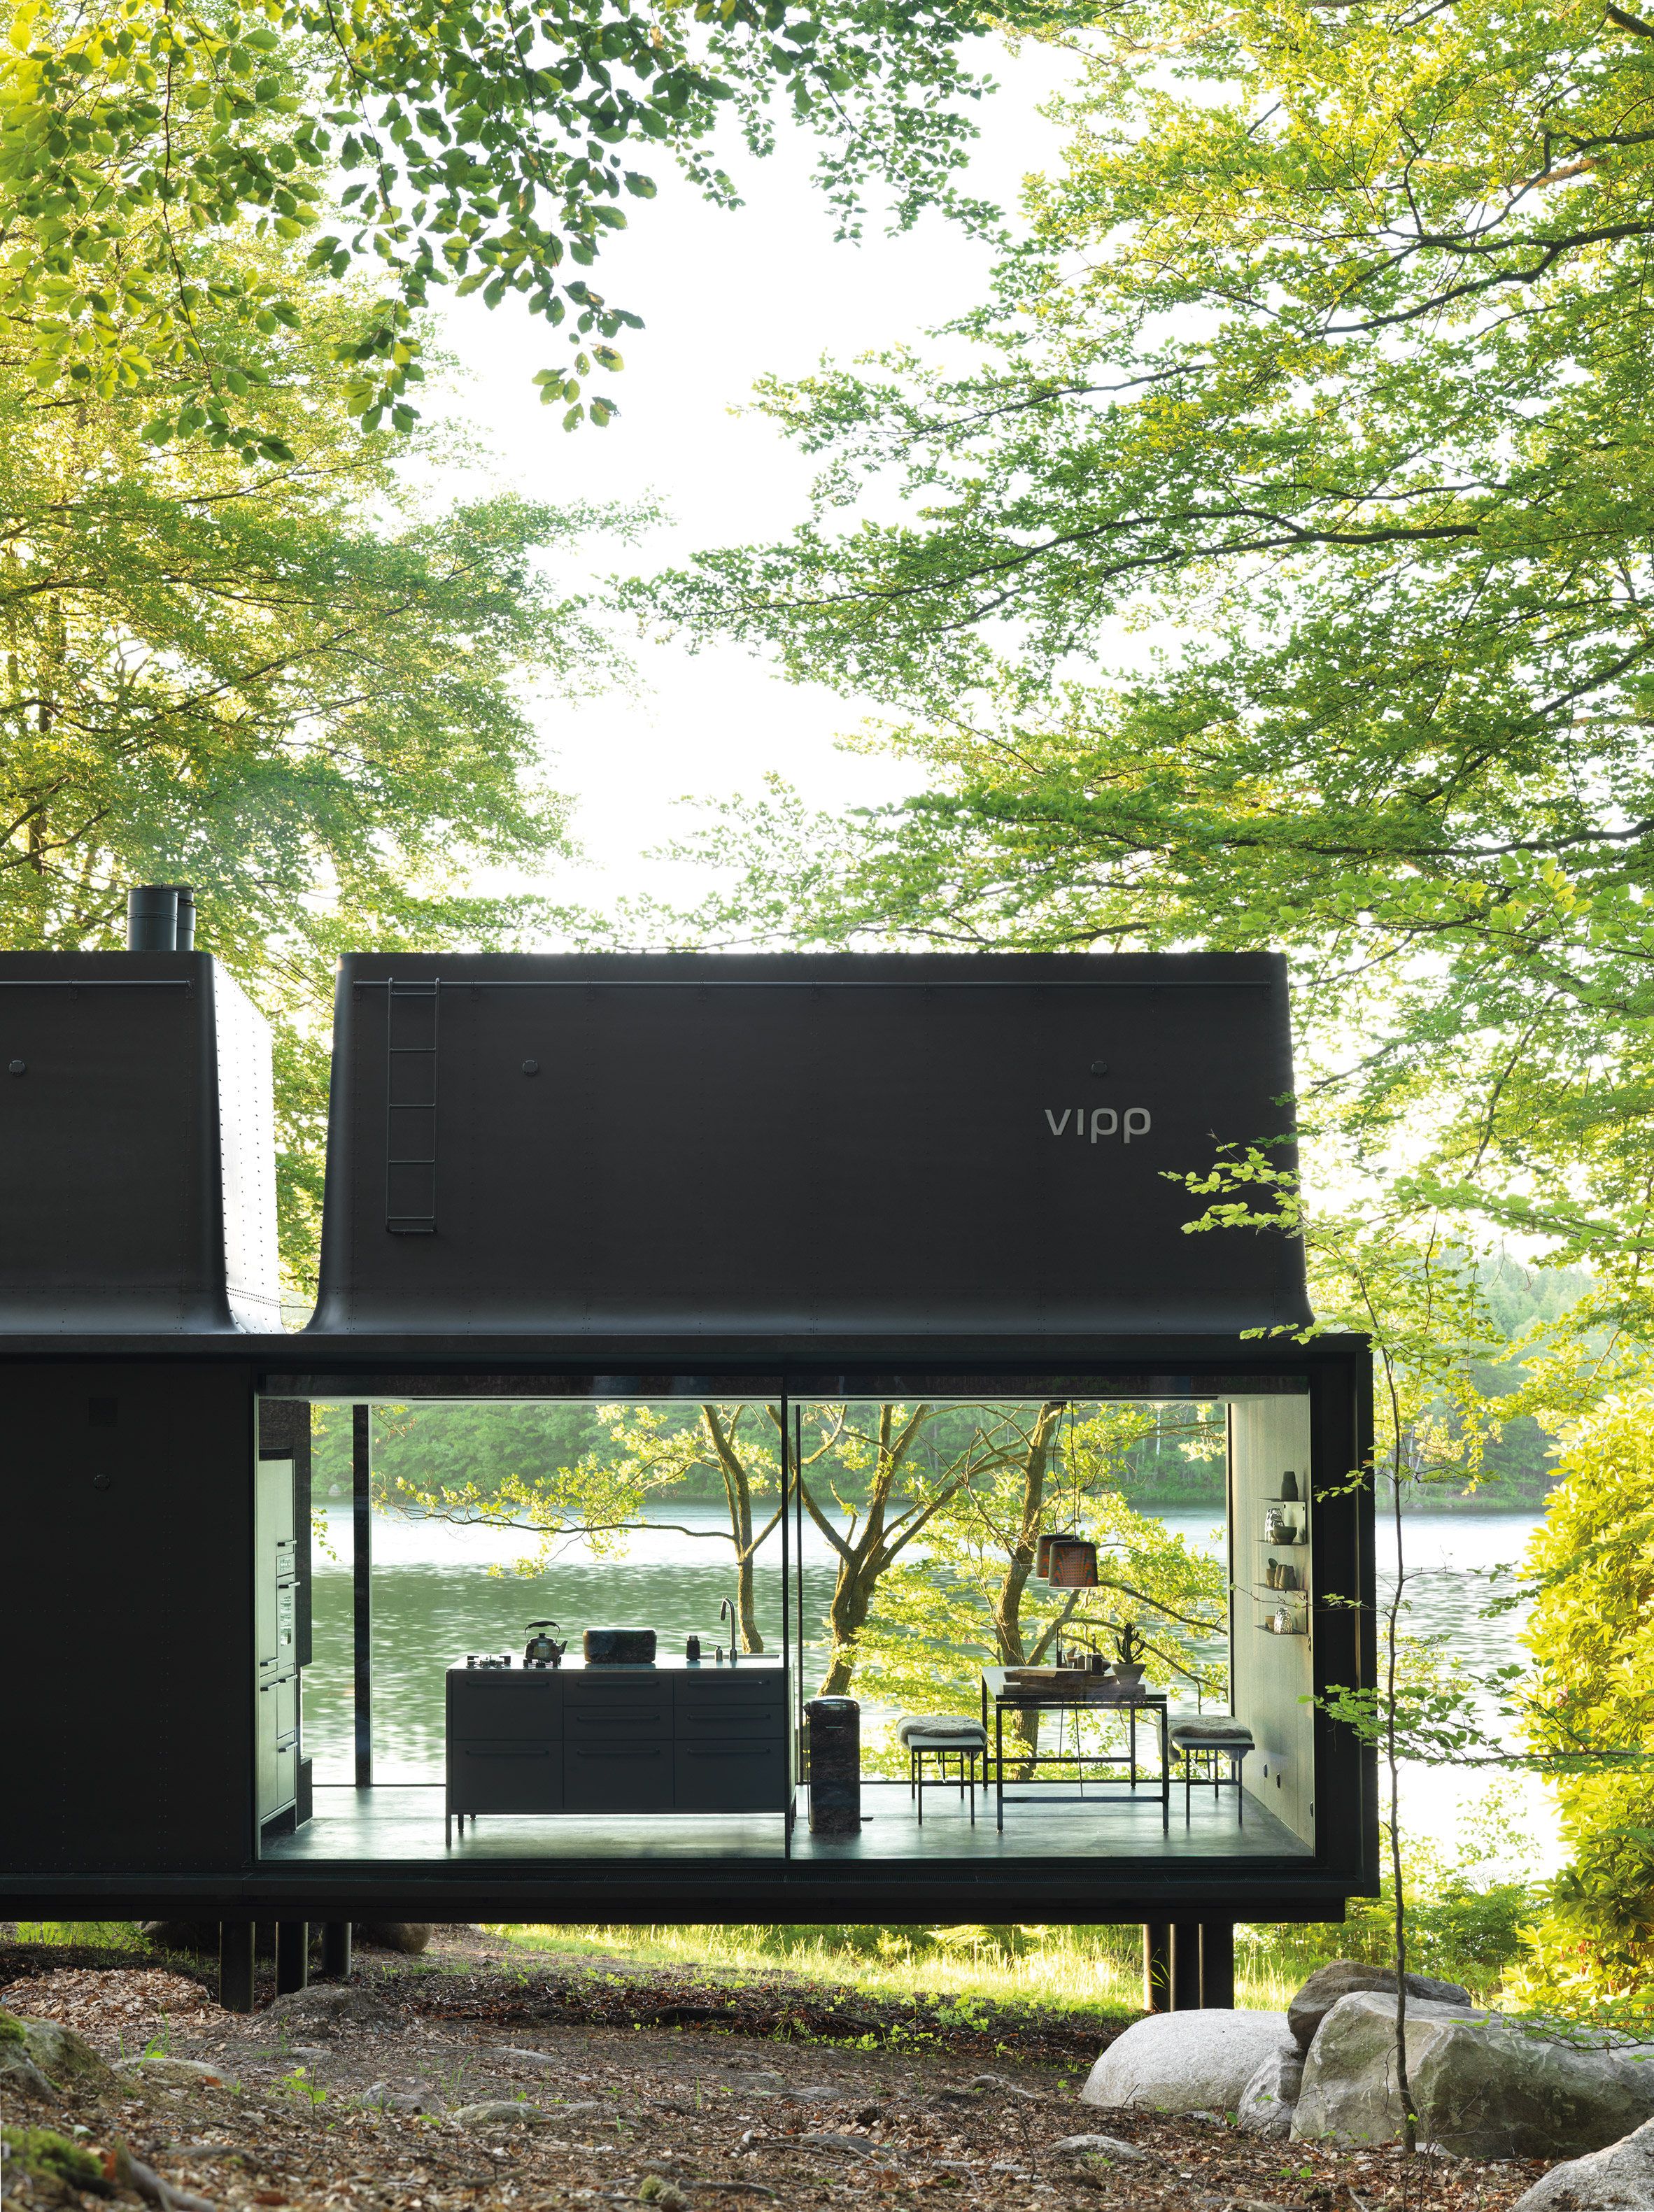 Vipp's Plug and Play Getaway Shelter - Gessato